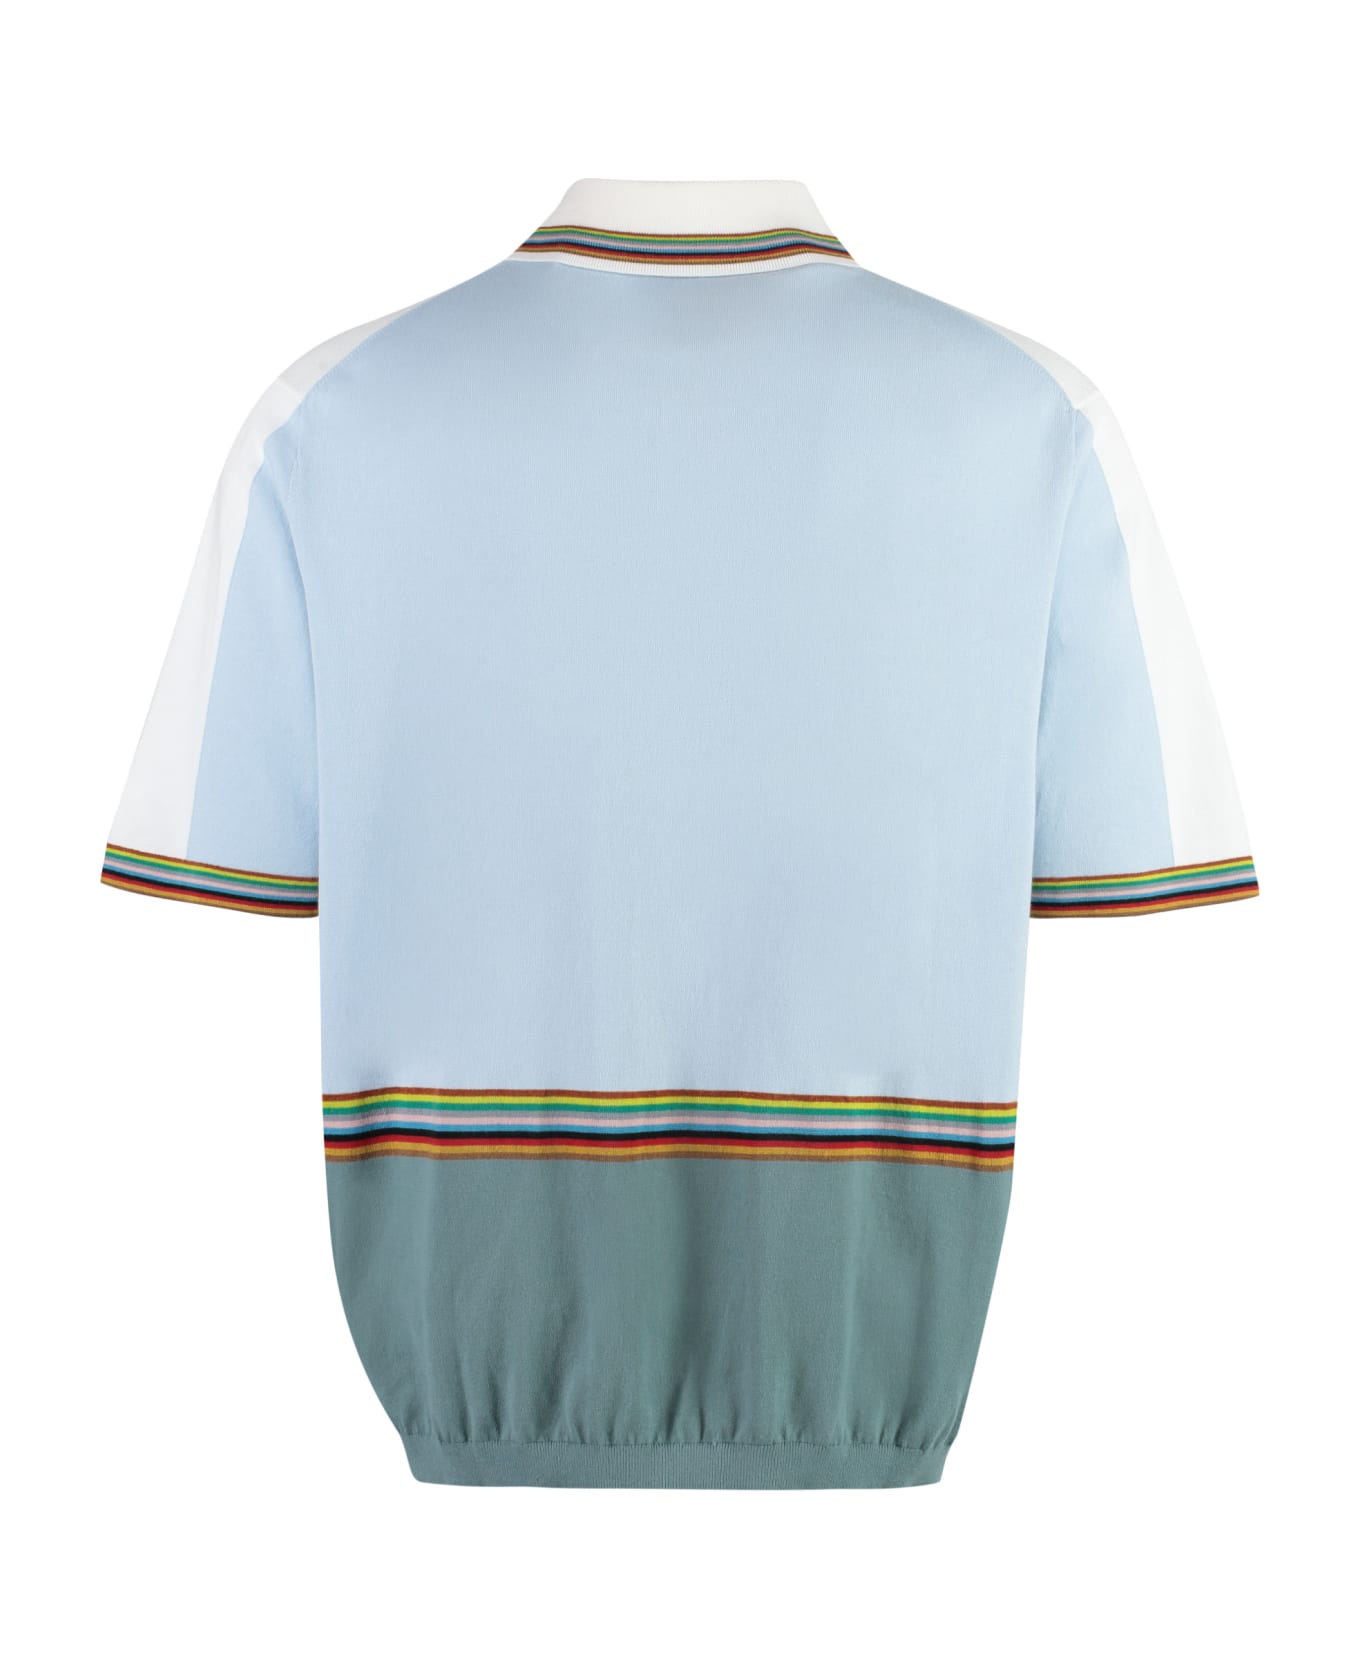 Paul Smith Knitted Cotton Polo Shirt - Light Blue